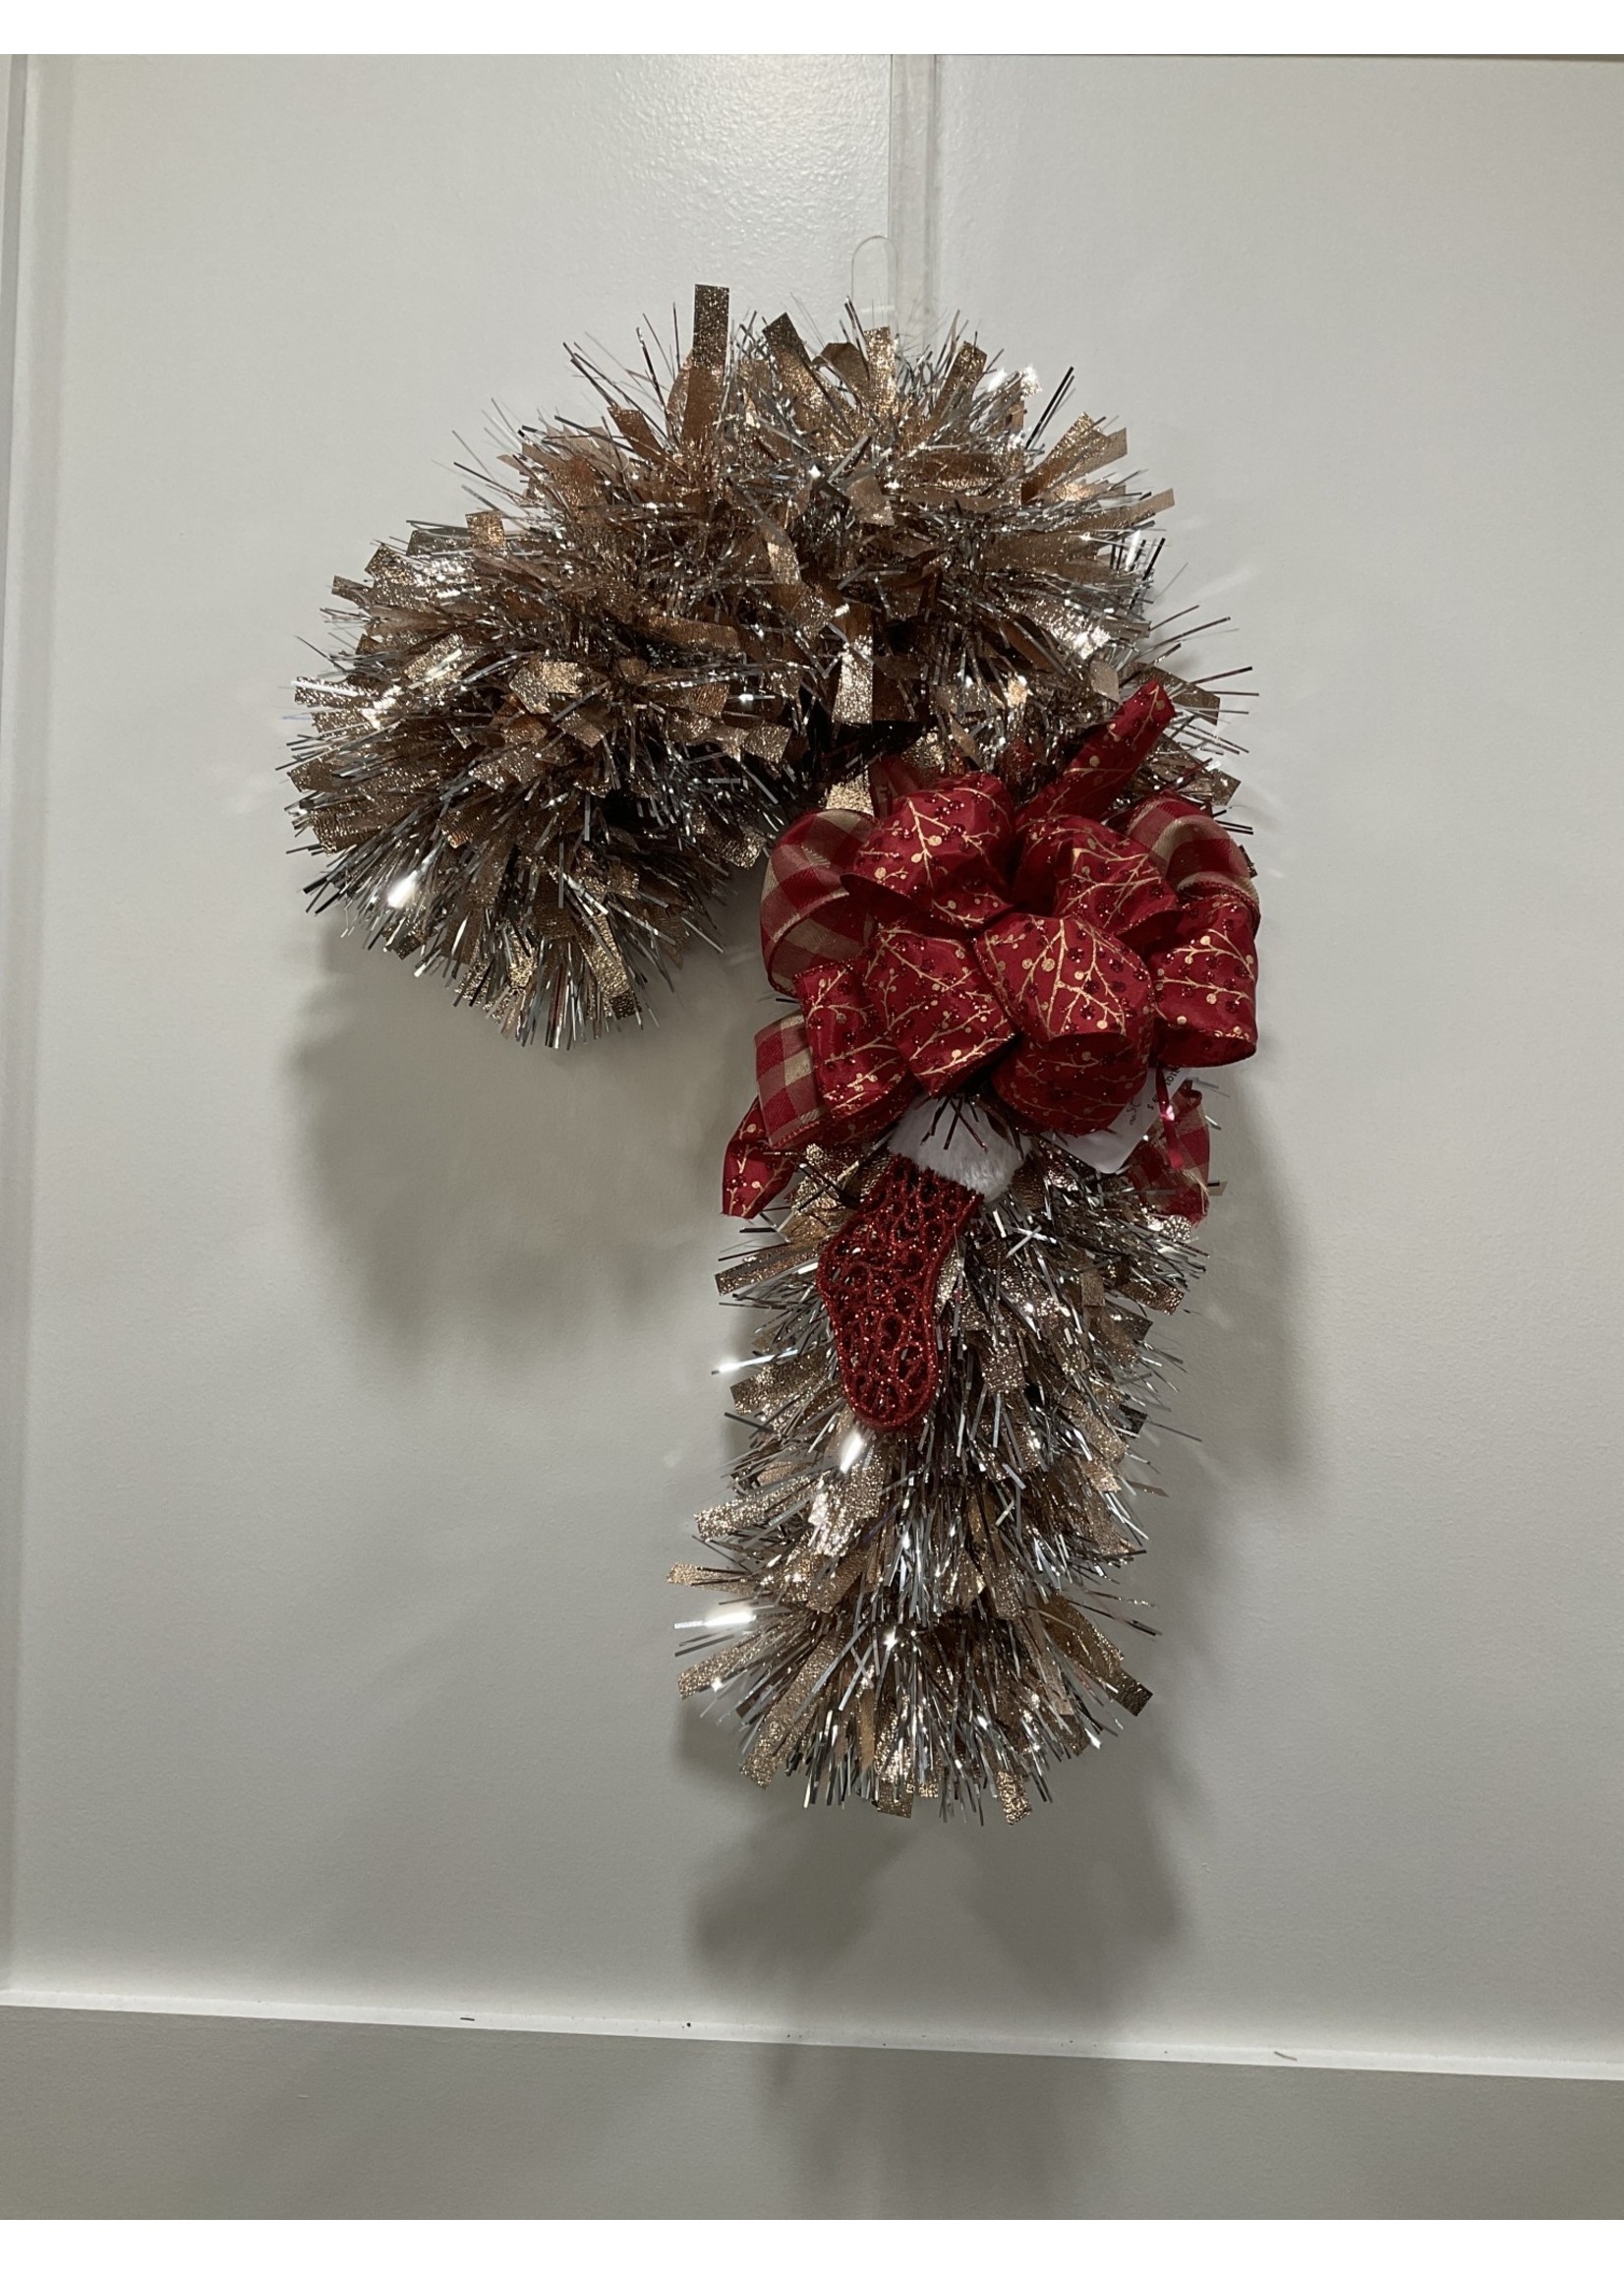 My New Favorite Thing Wreath Candy Cane 24 in-Rose Gold Tinsel w/Stocking and Red Gold Glitter Ribbon